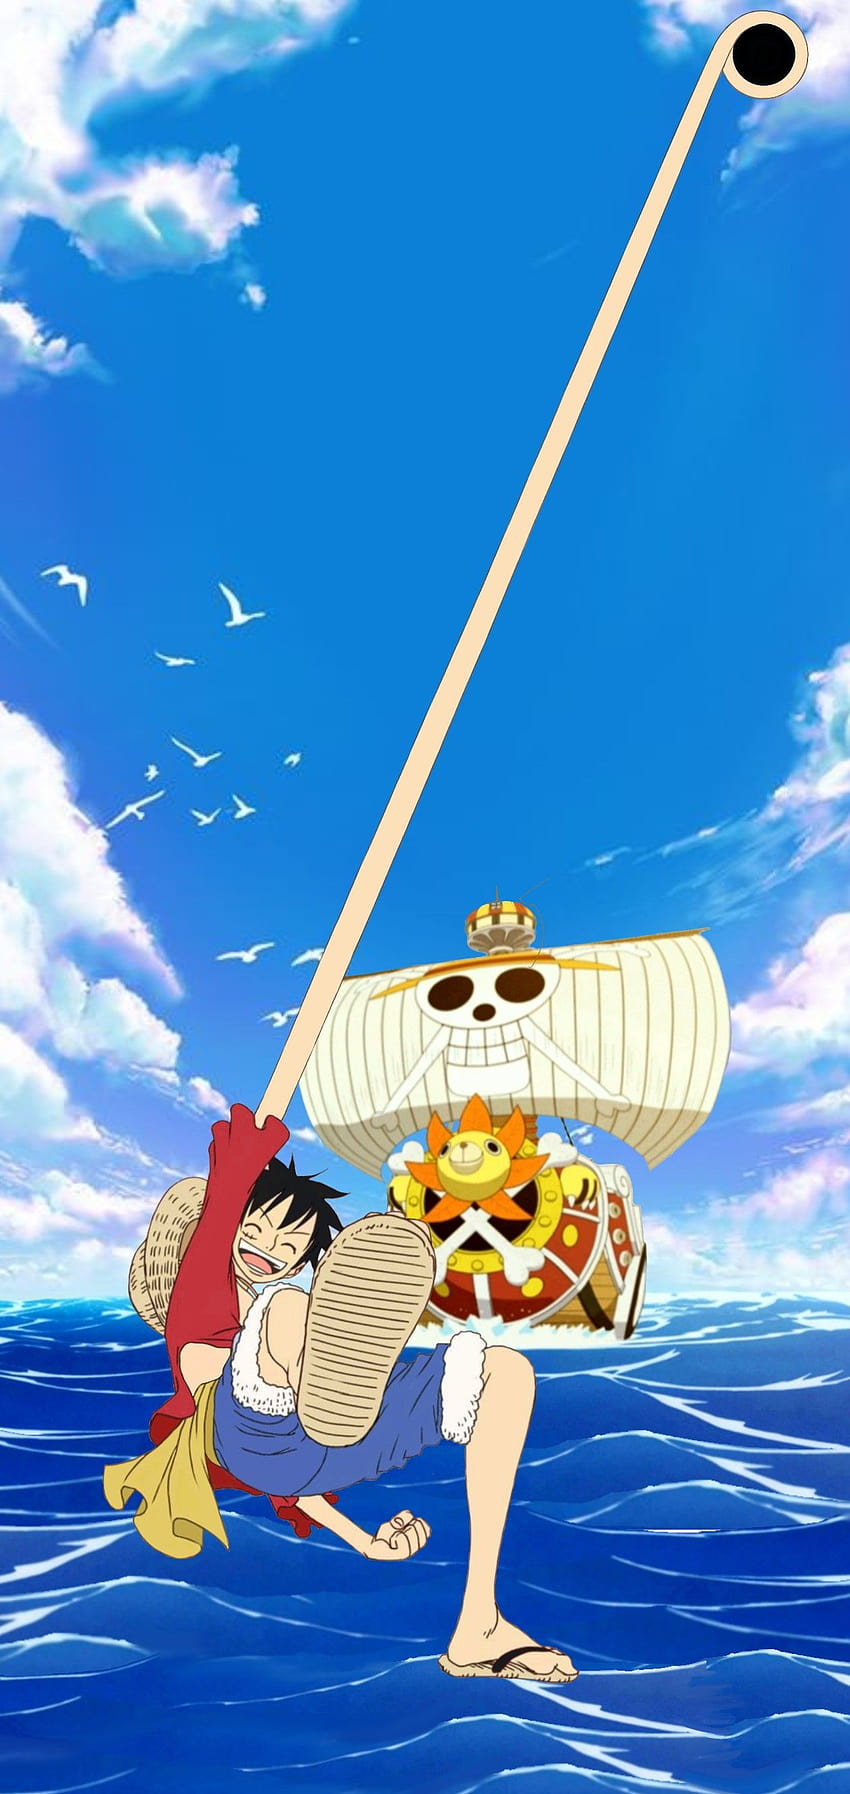 Luffy Ocean Thousand Sunny One Piece Galaxy s10 Luffy's, ps4 anime one piece wanted HD phone wallpaper